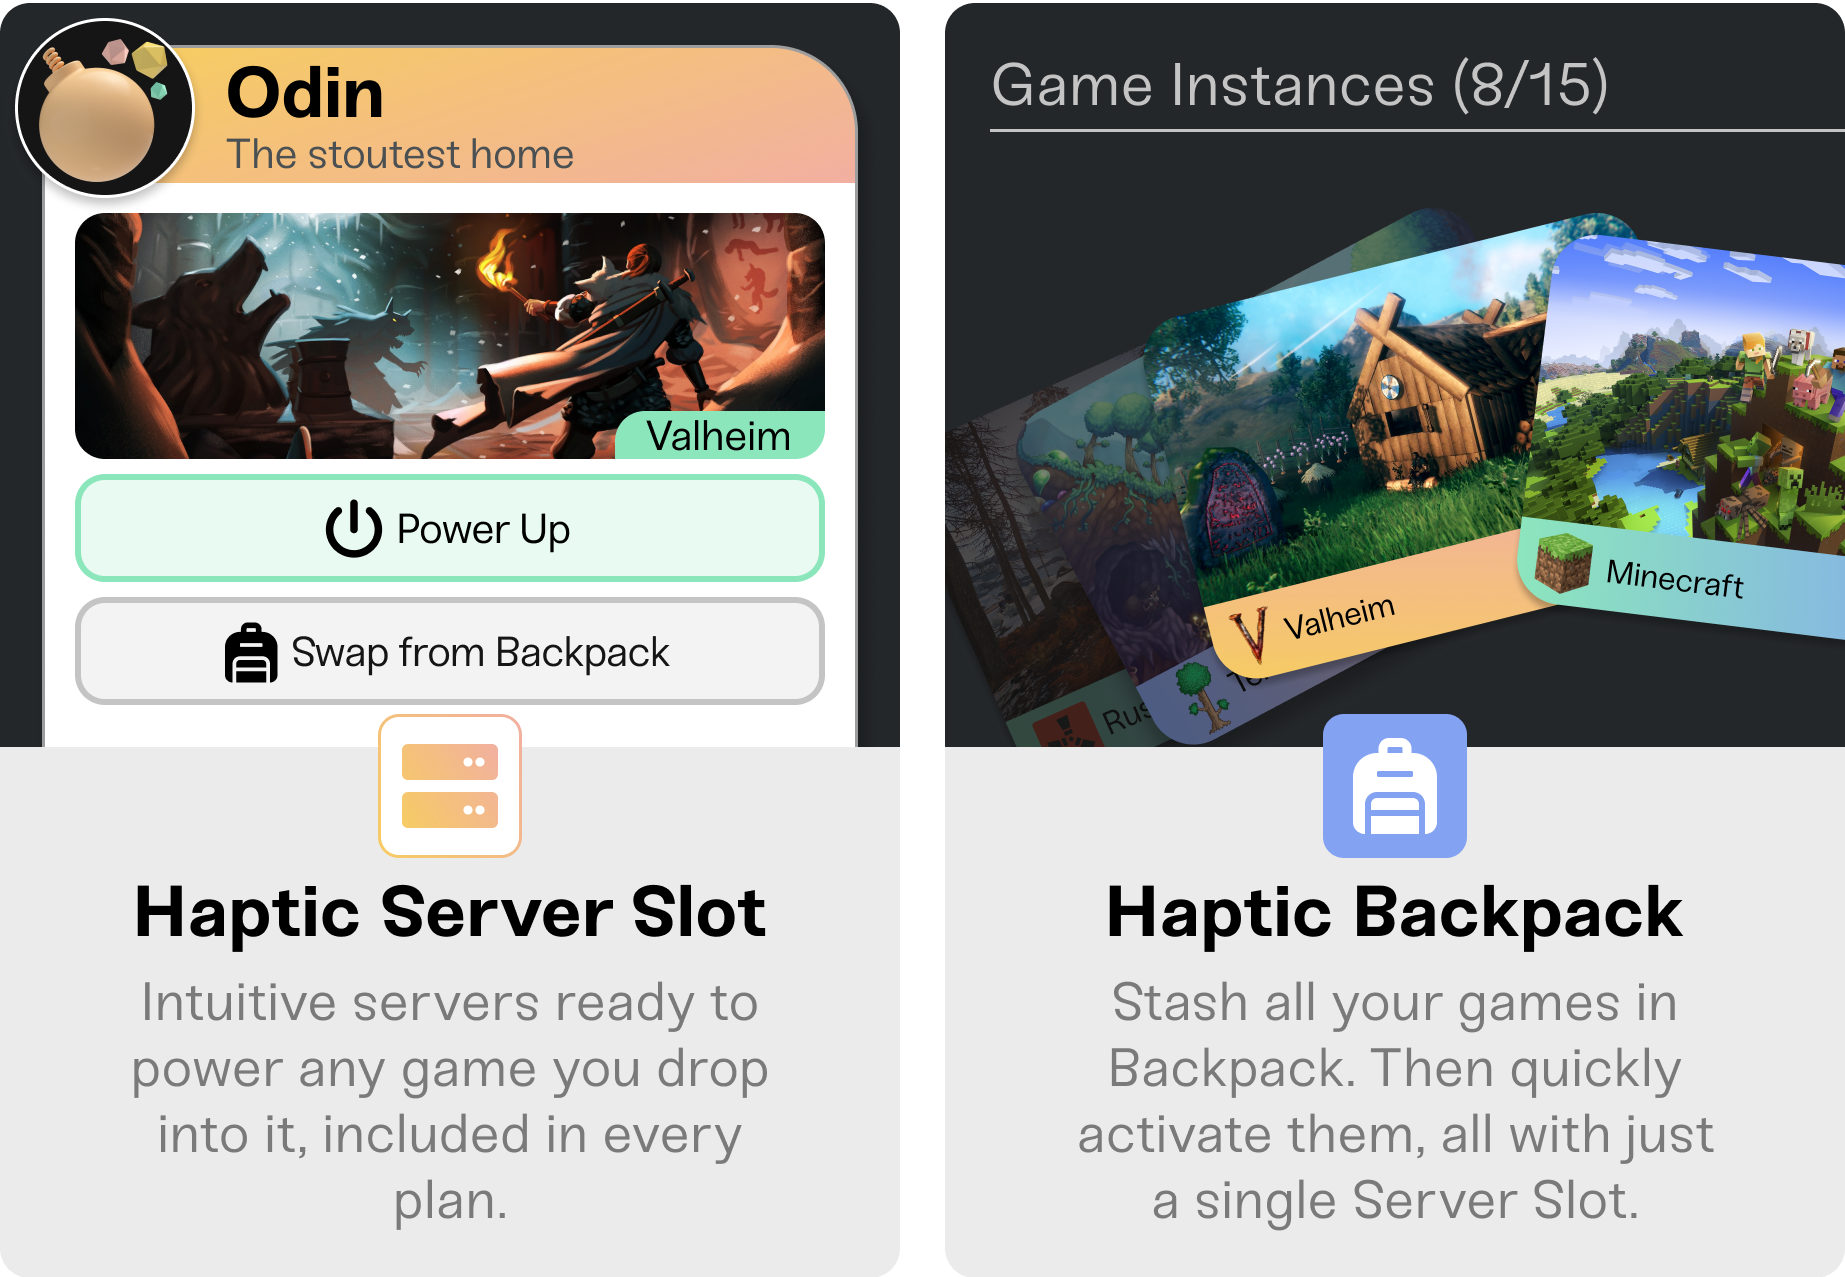 Haptic Server Slot and Haptic Backpack cards with Valheim, Minecraft, Ark: Survival Evolved, and Rust being shown off. 